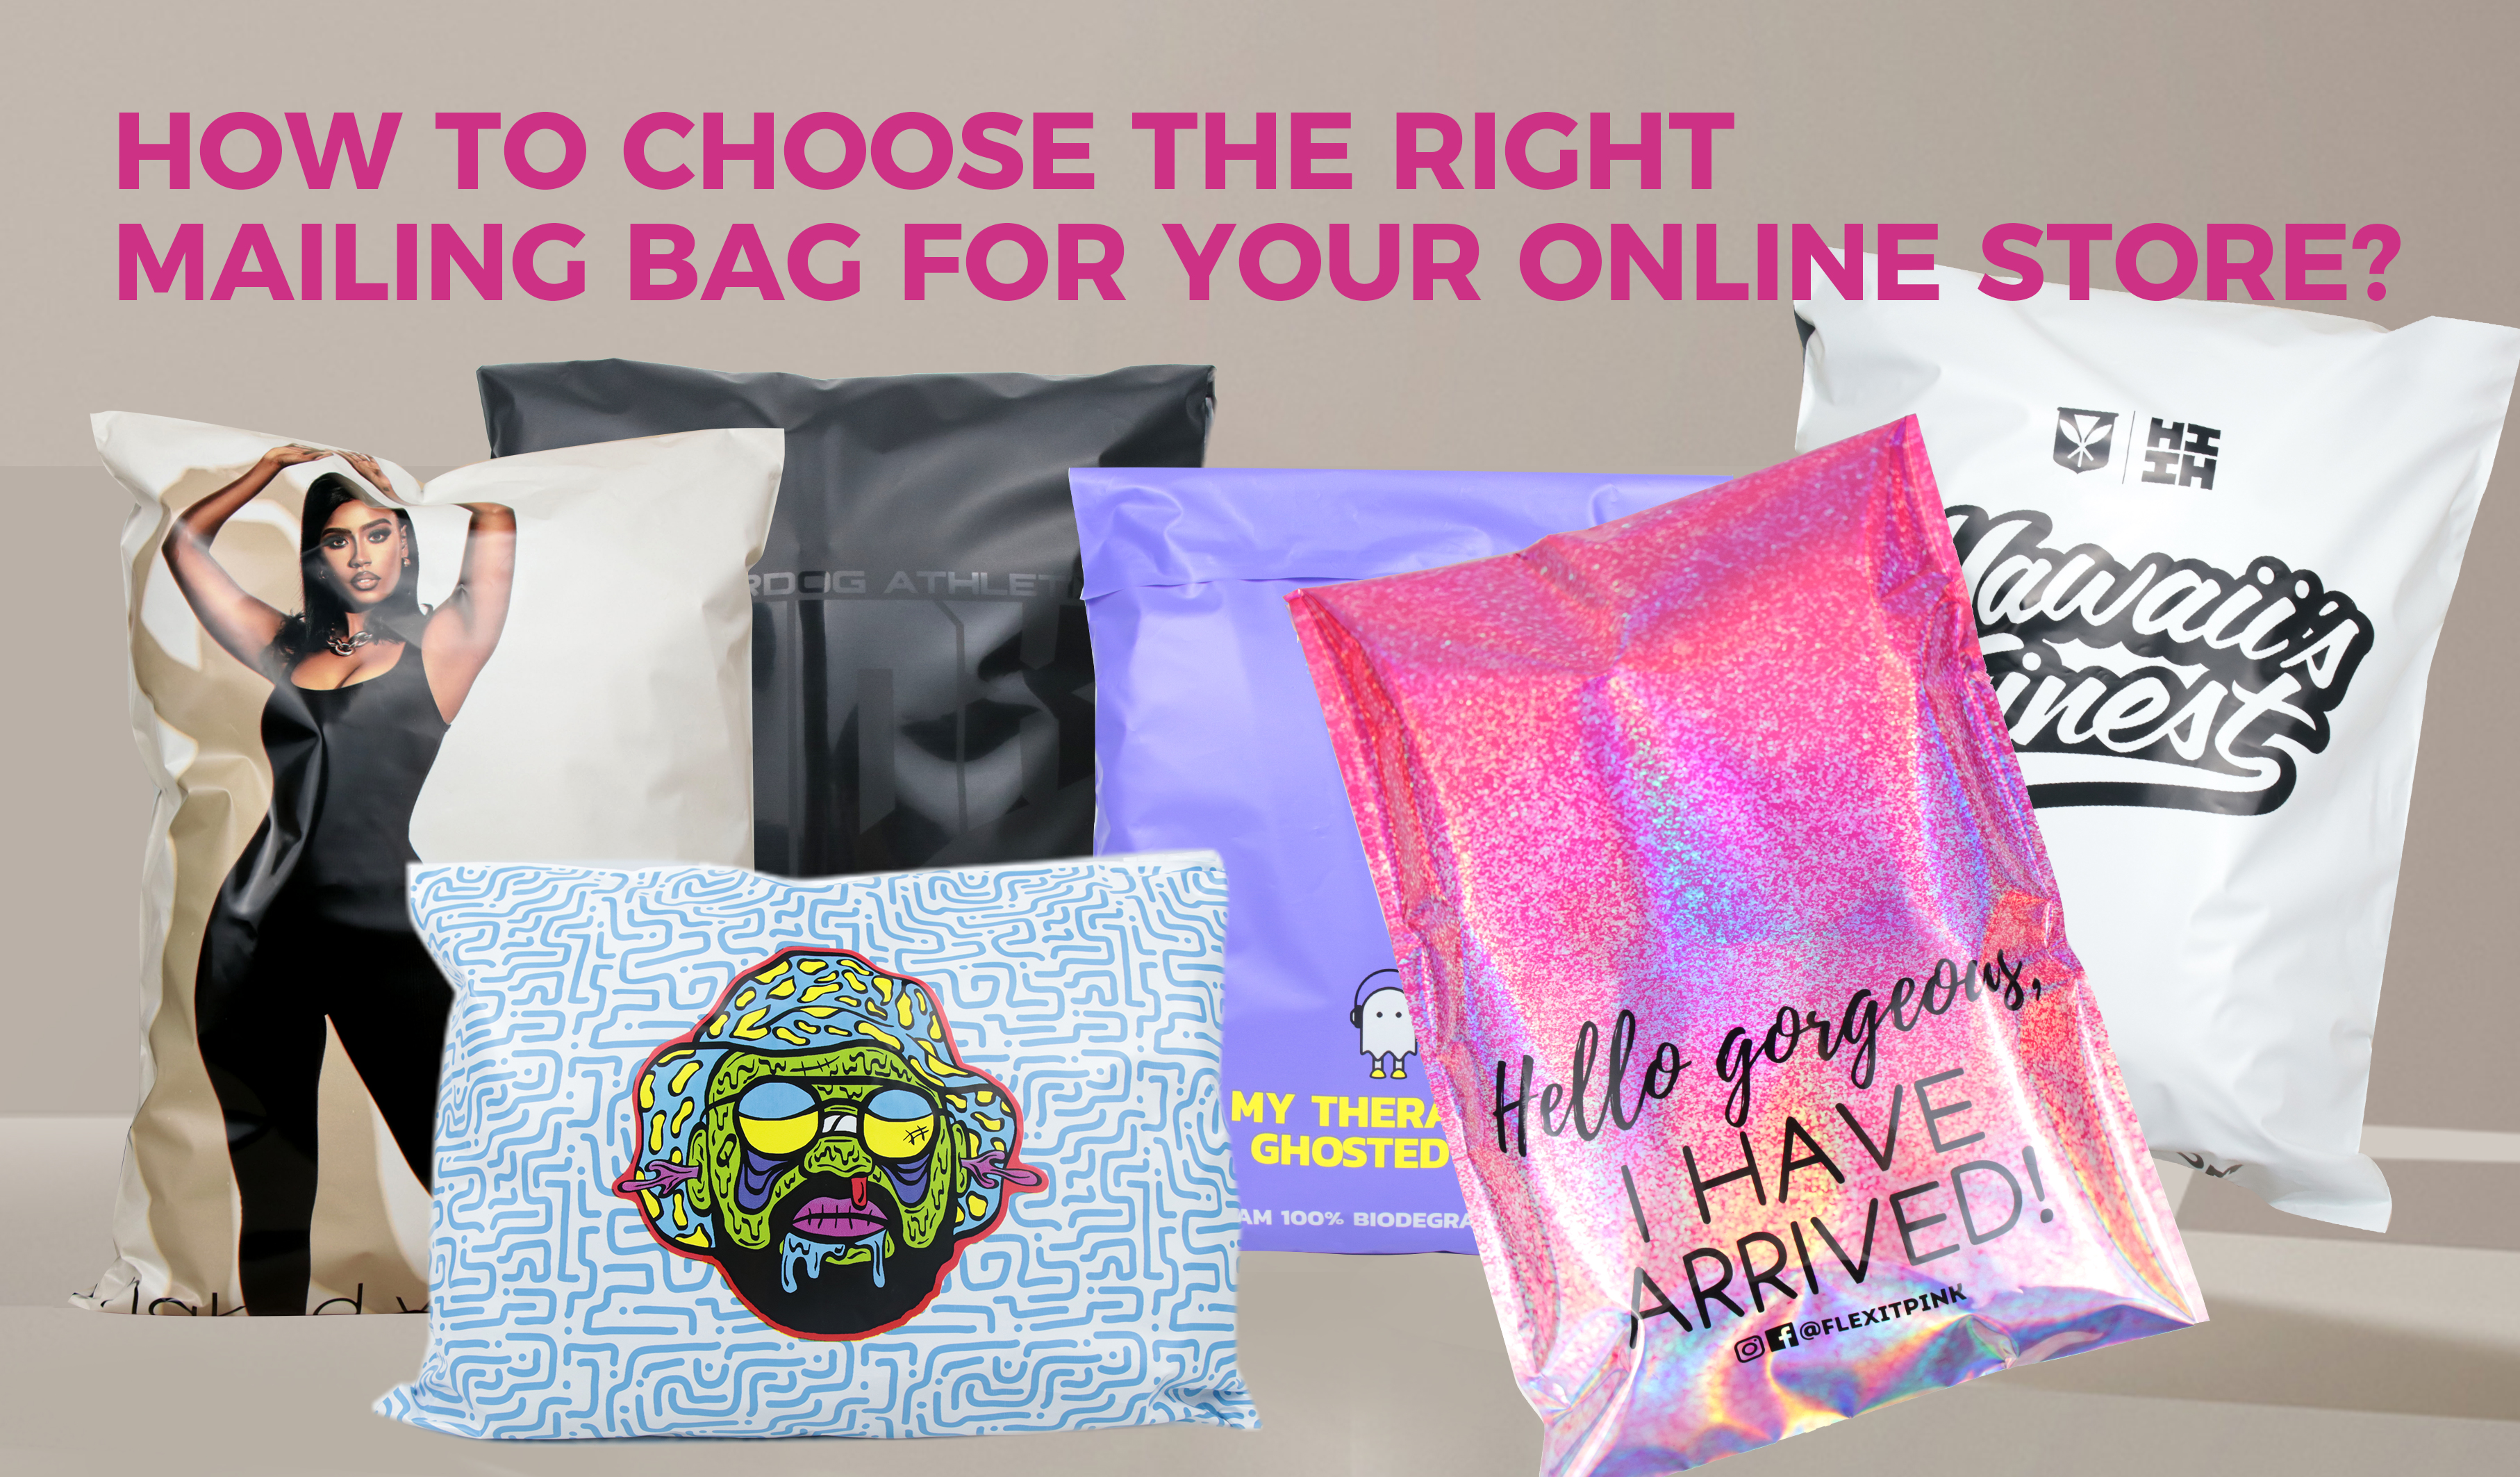 How to Choose the right mailing bag for your online store？